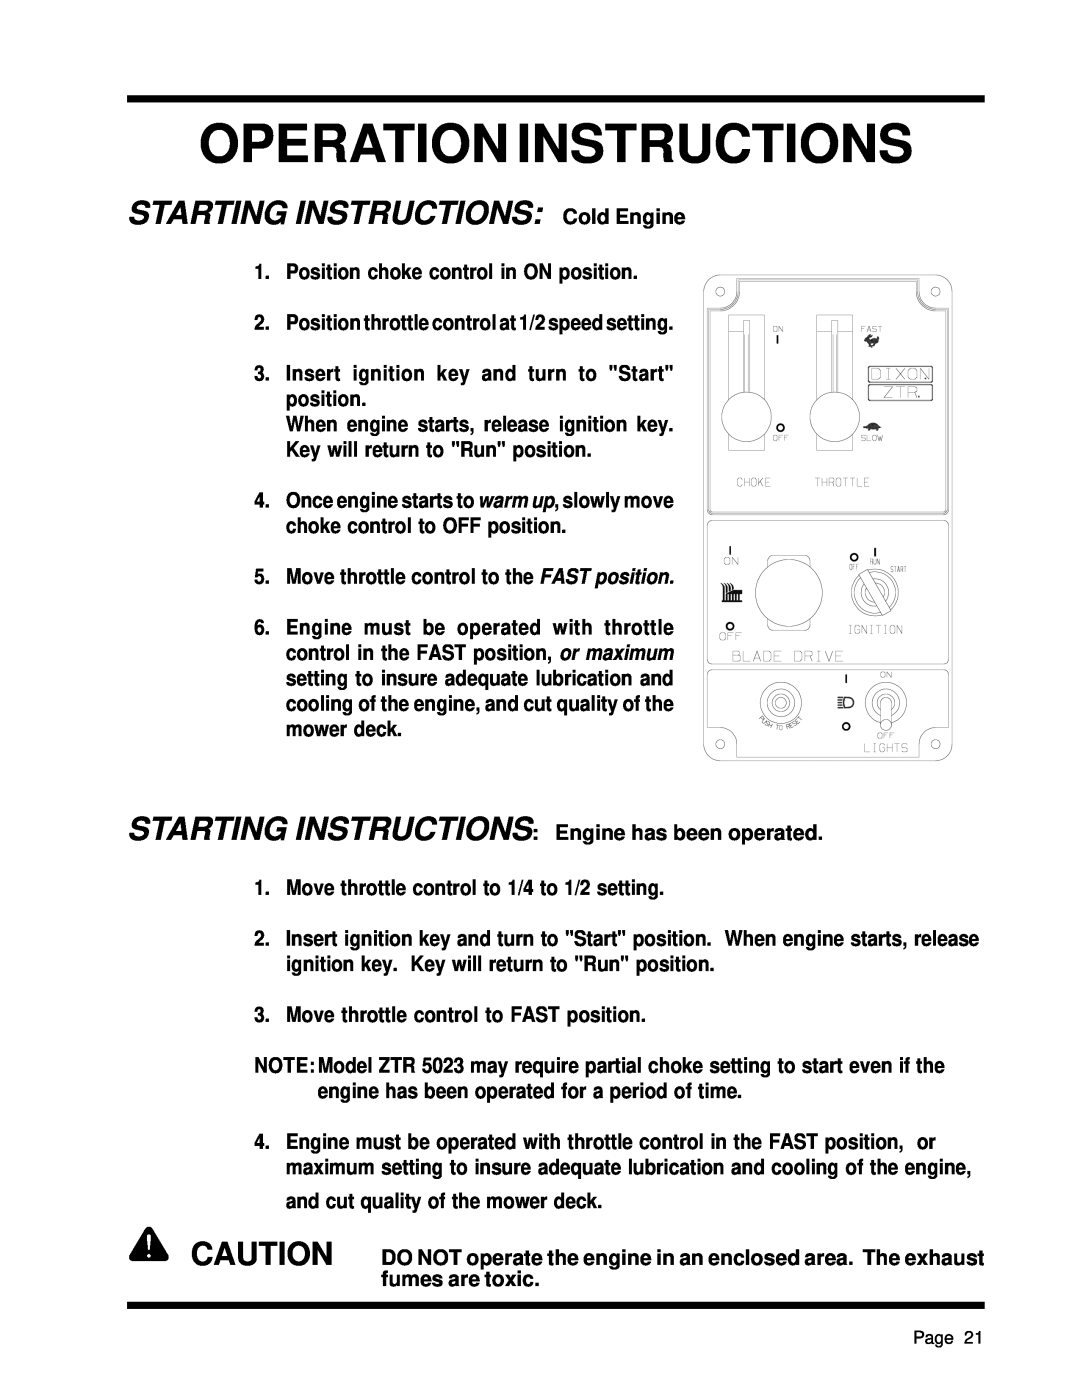 Dixon ZTR 5425, ZTR 5023 manual STARTING INSTRUCTIONS Cold Engine, Operation Instructions 